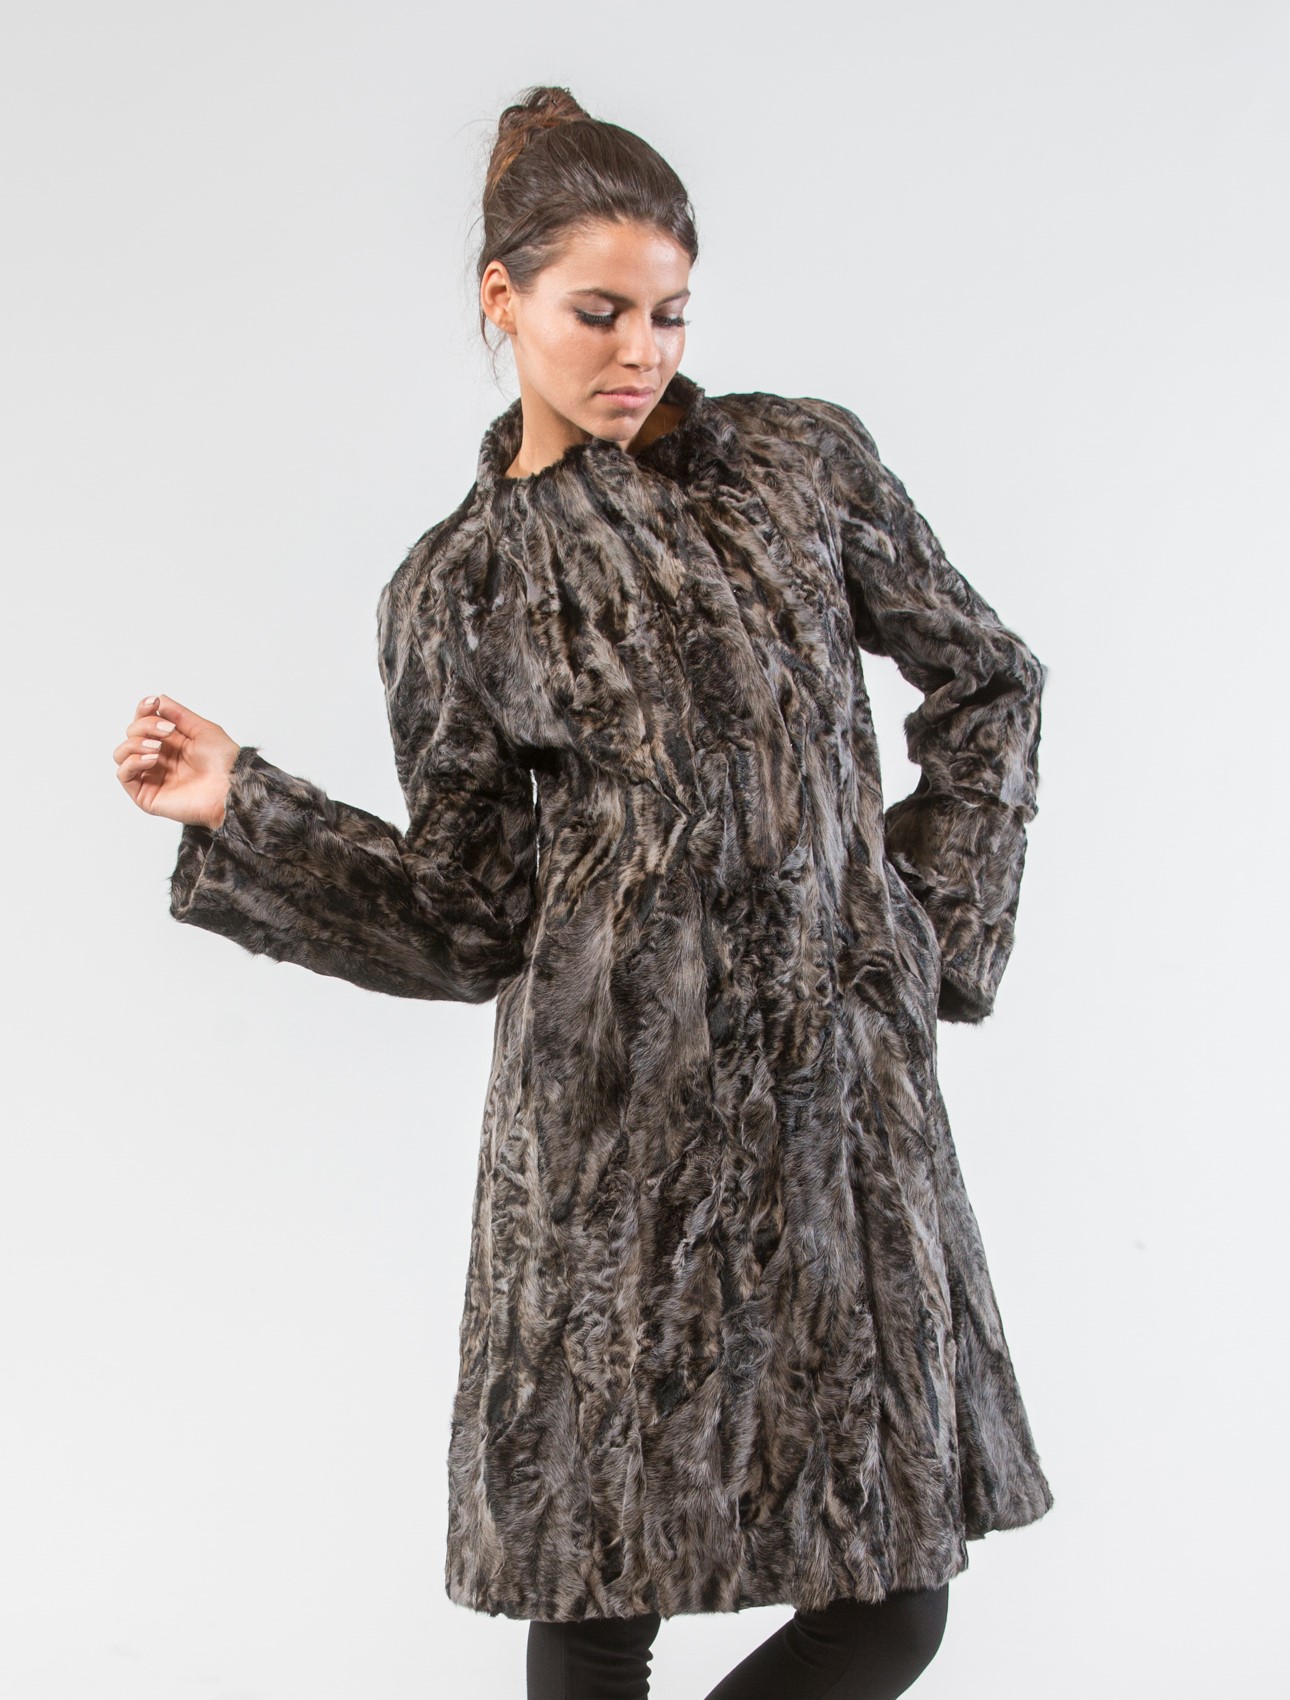 Azure Astrakhan Long Fur Jacket .100% Real Fur Coats and Accessories.